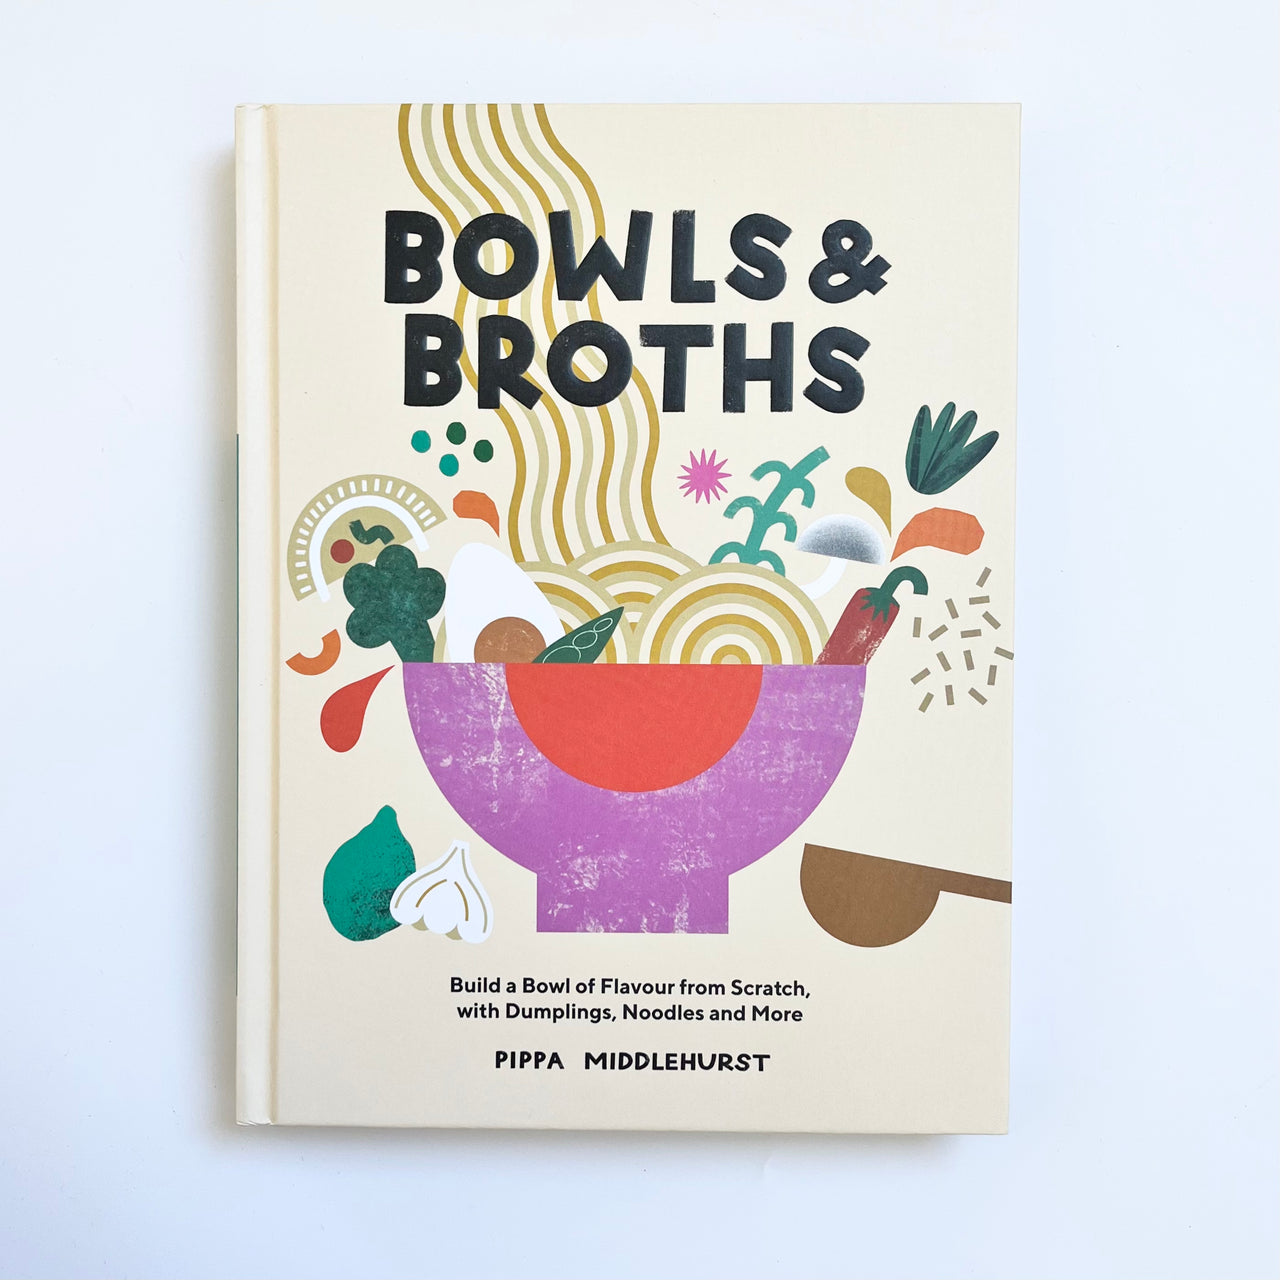 Bowls & Broths: Build a Bowl of Flavour from Scratch with Dumplings, Noodles and More book by Pippa Middlehurst. Australian Art Prints and Homewares. Green Door Decor. www.greendoordecor.com.au